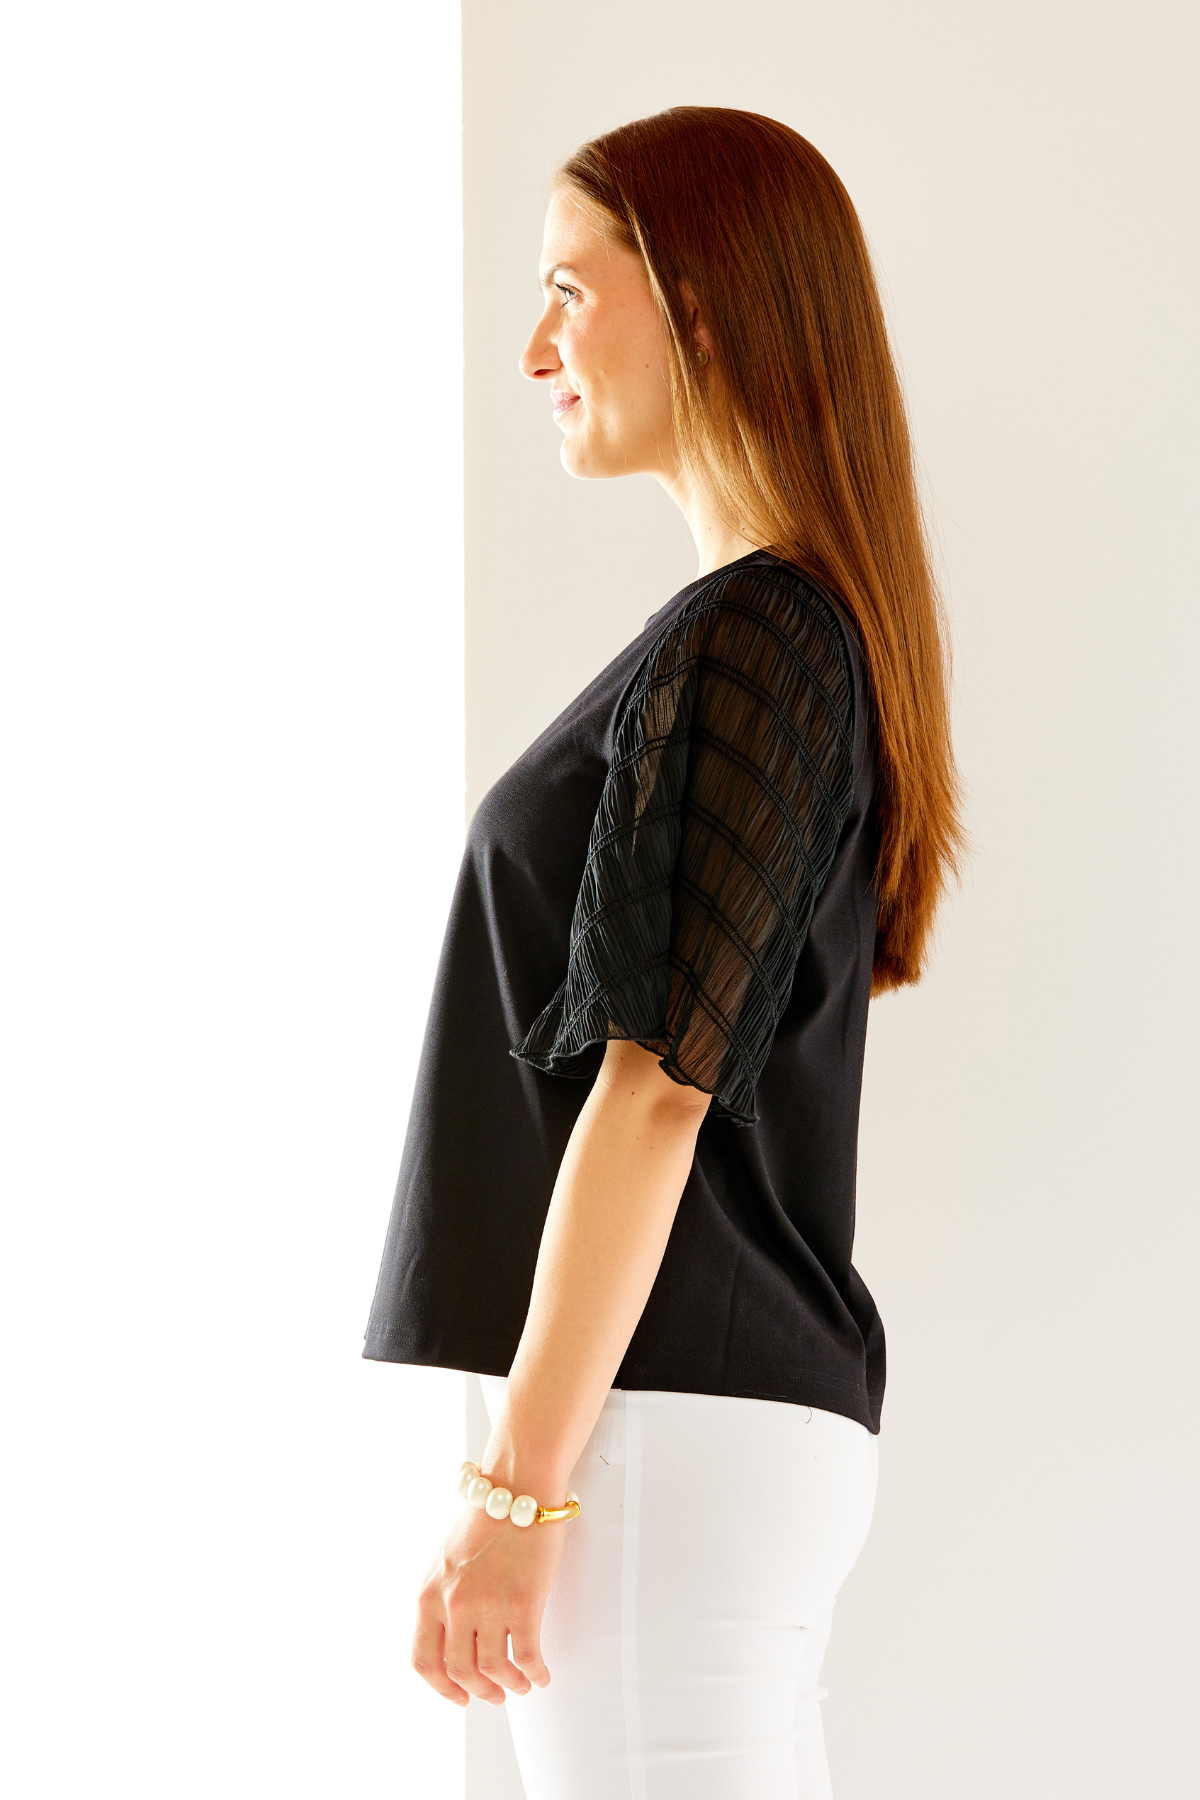 Woman in black top with butterfly sleeves